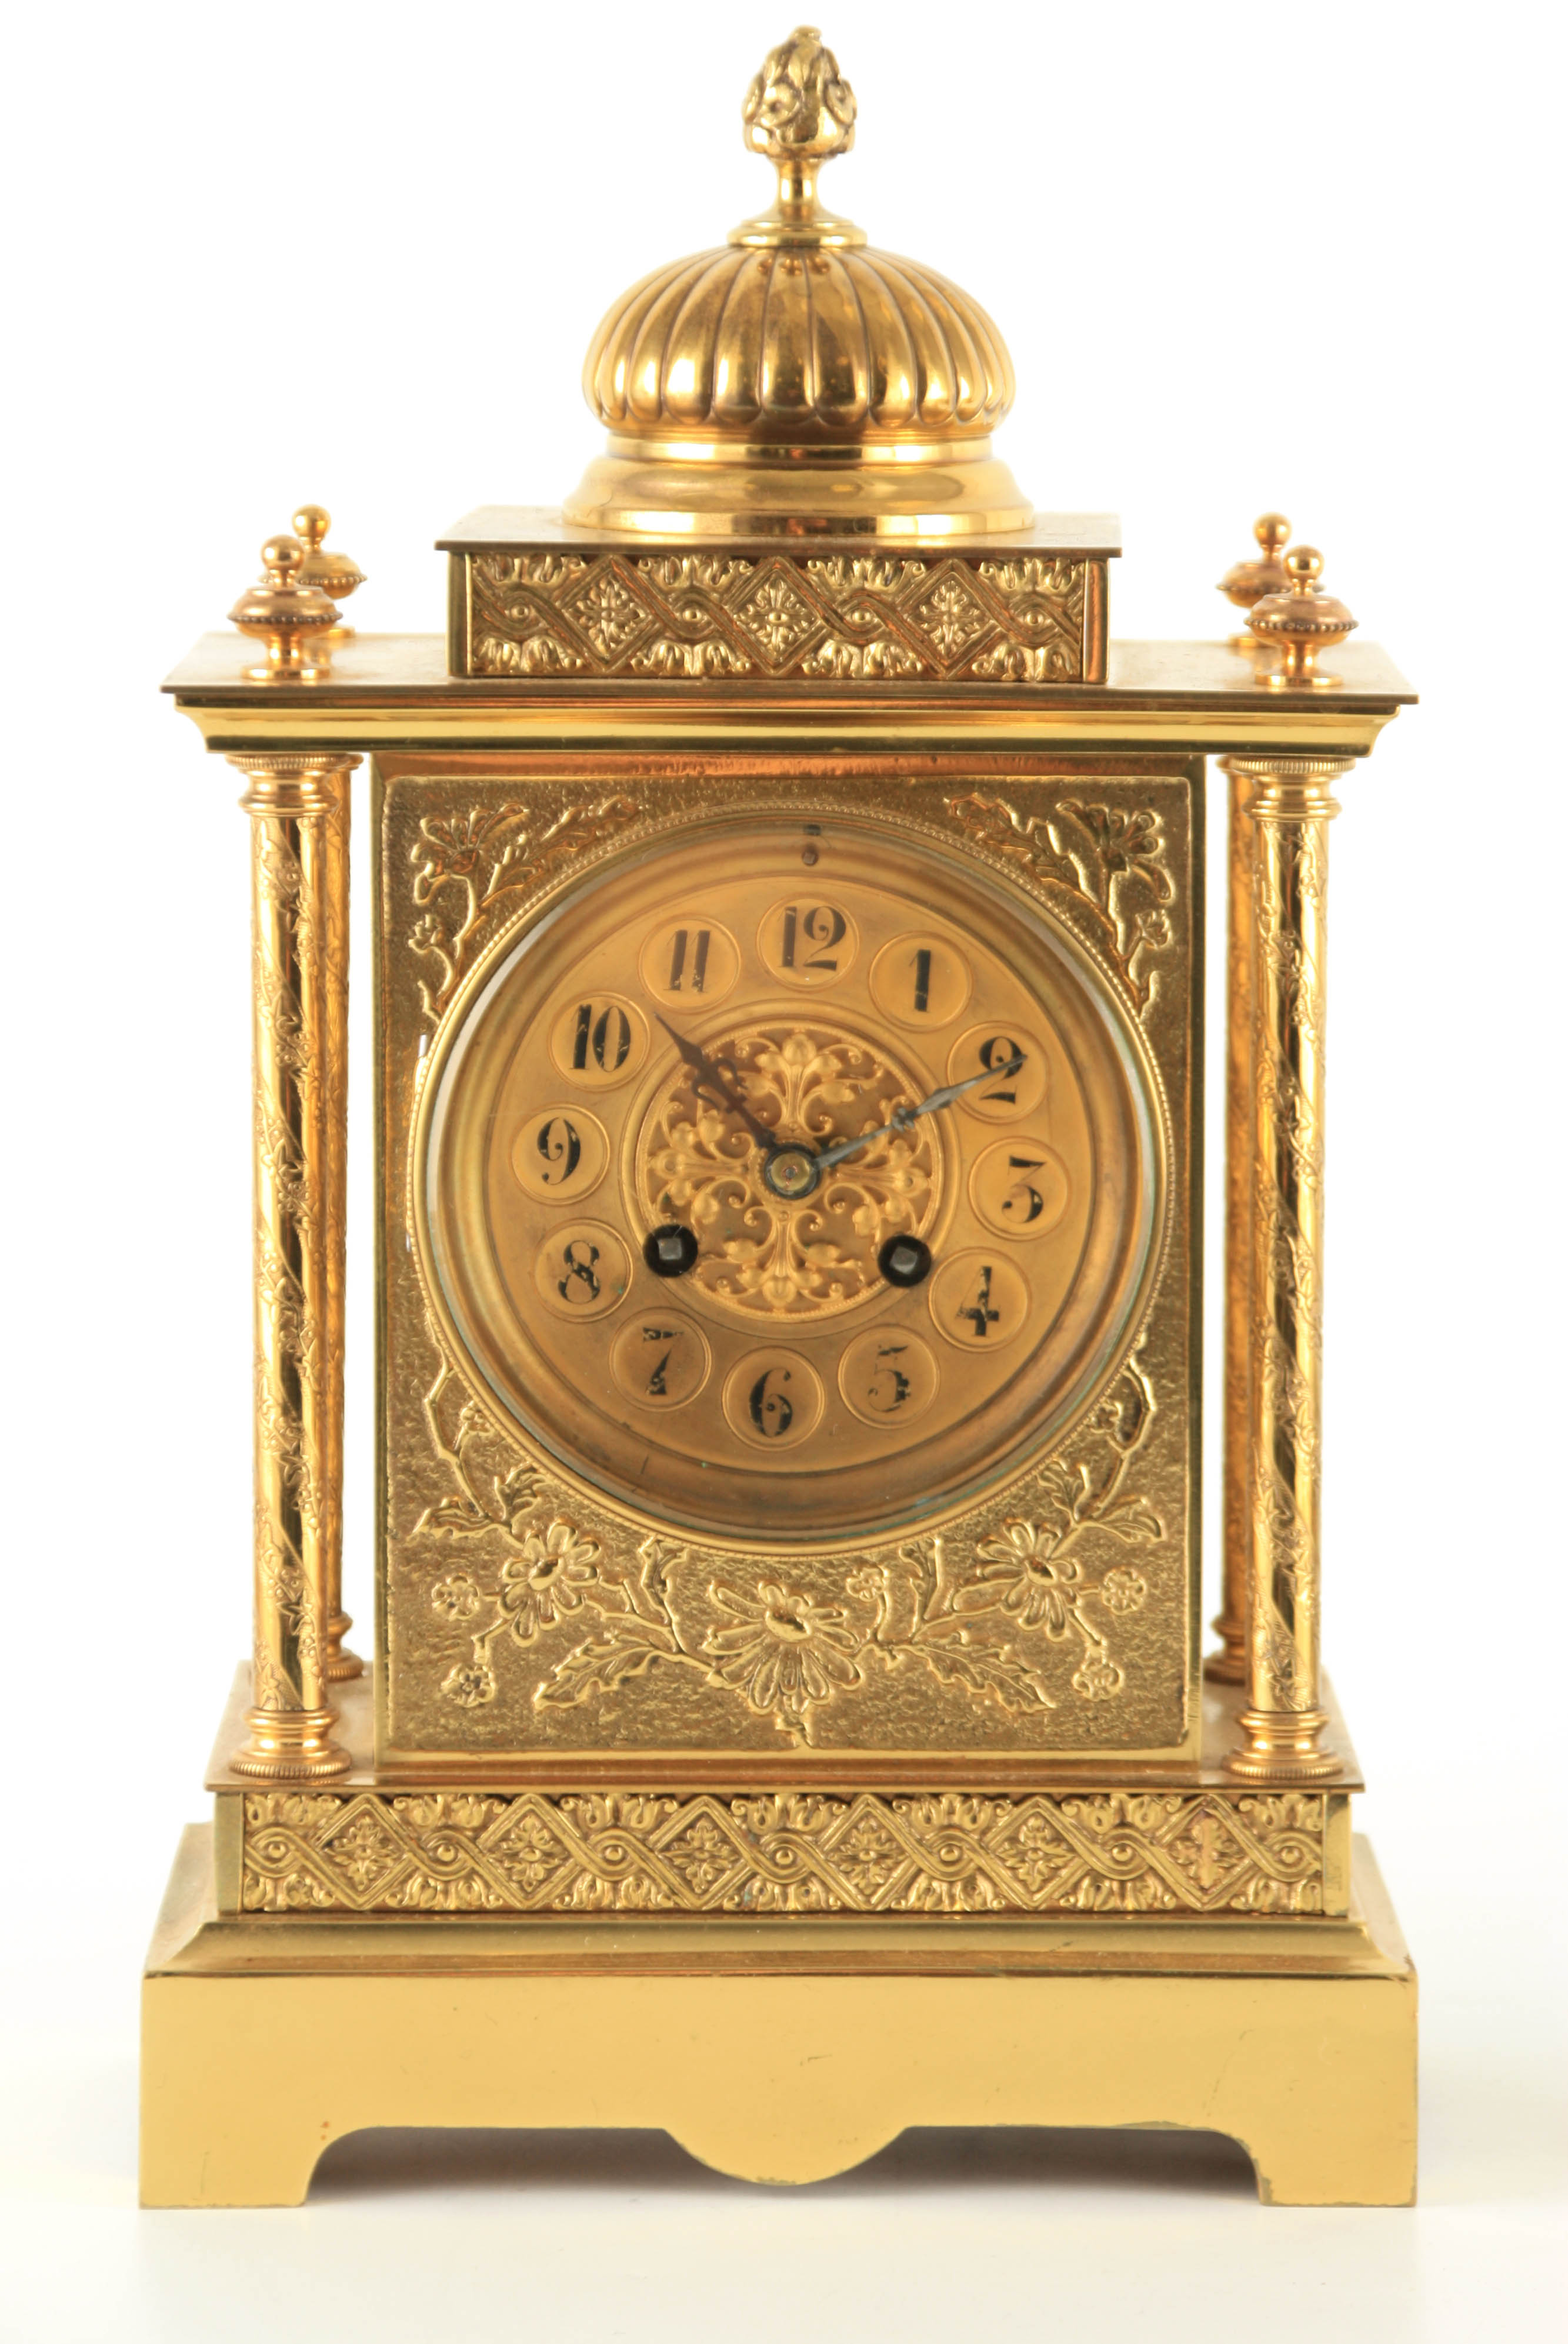 A LATE 19TH CENTURY FRENCH BRASS CASED MANTEL CLOCK having a domed top pediment above a floral - Image 3 of 12